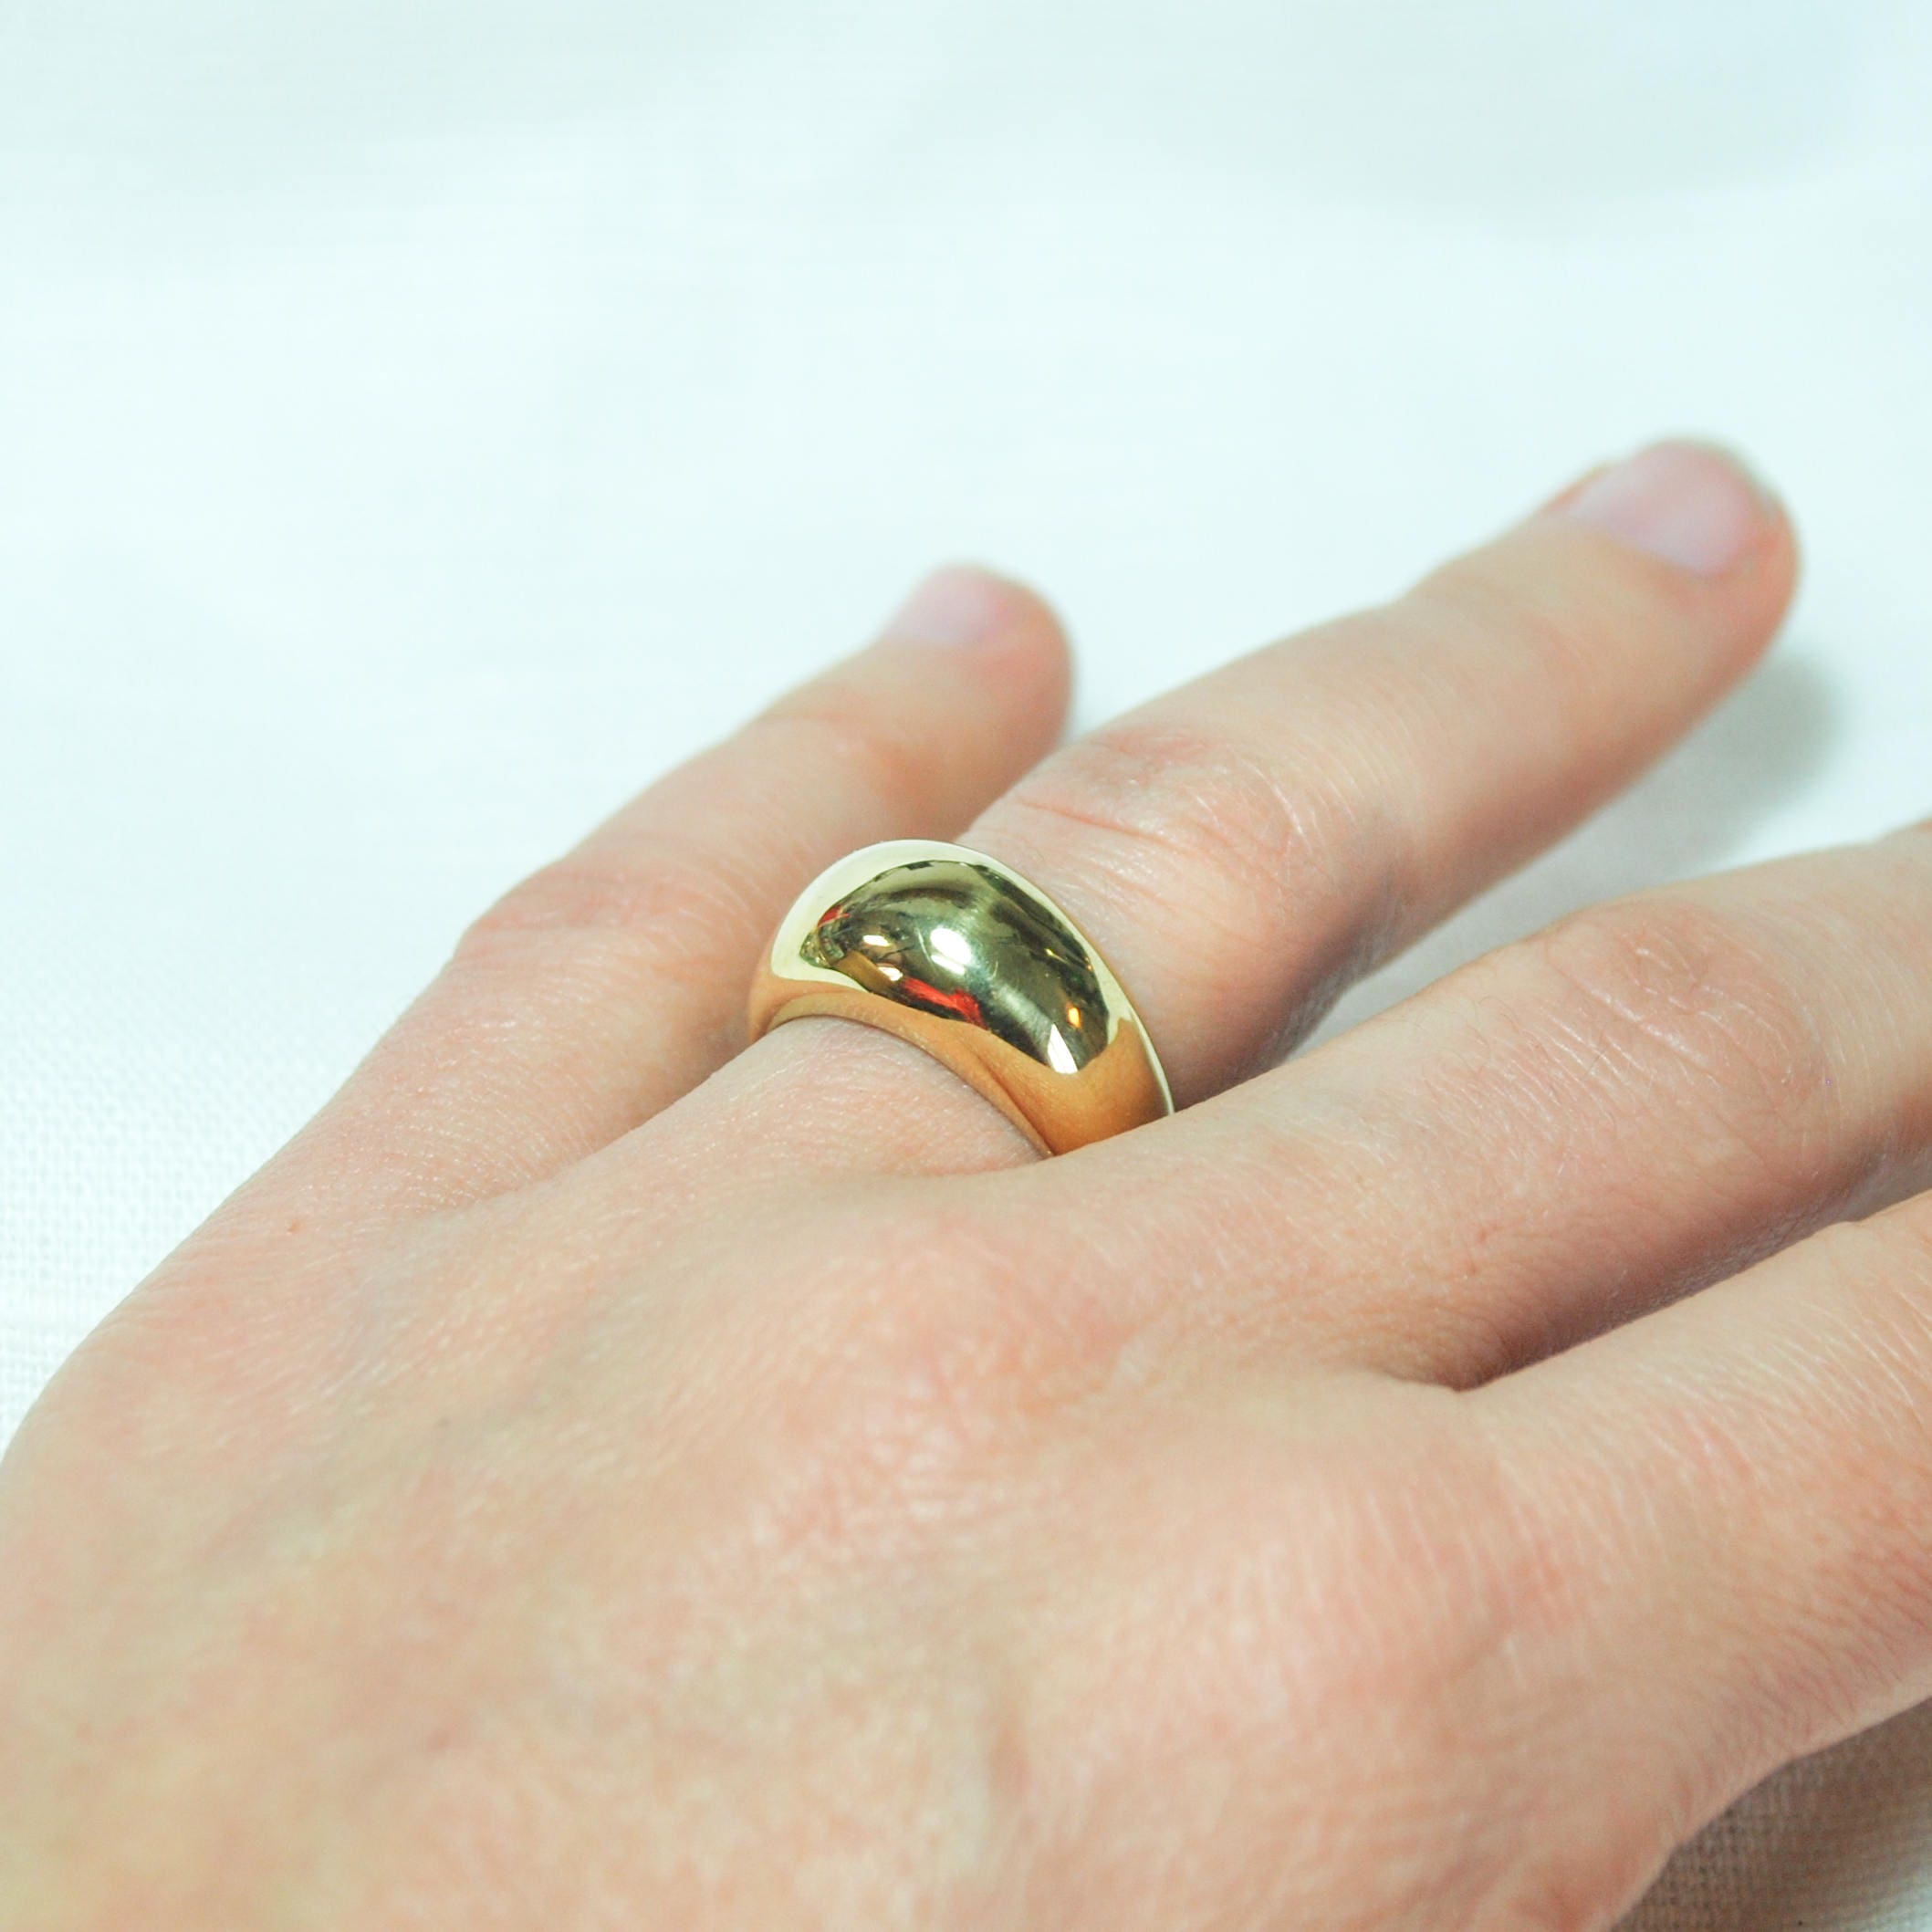 Buy 14K Gold Ring for Her, Gold Dome Ring, Dome Ring, Everyday Ring ...